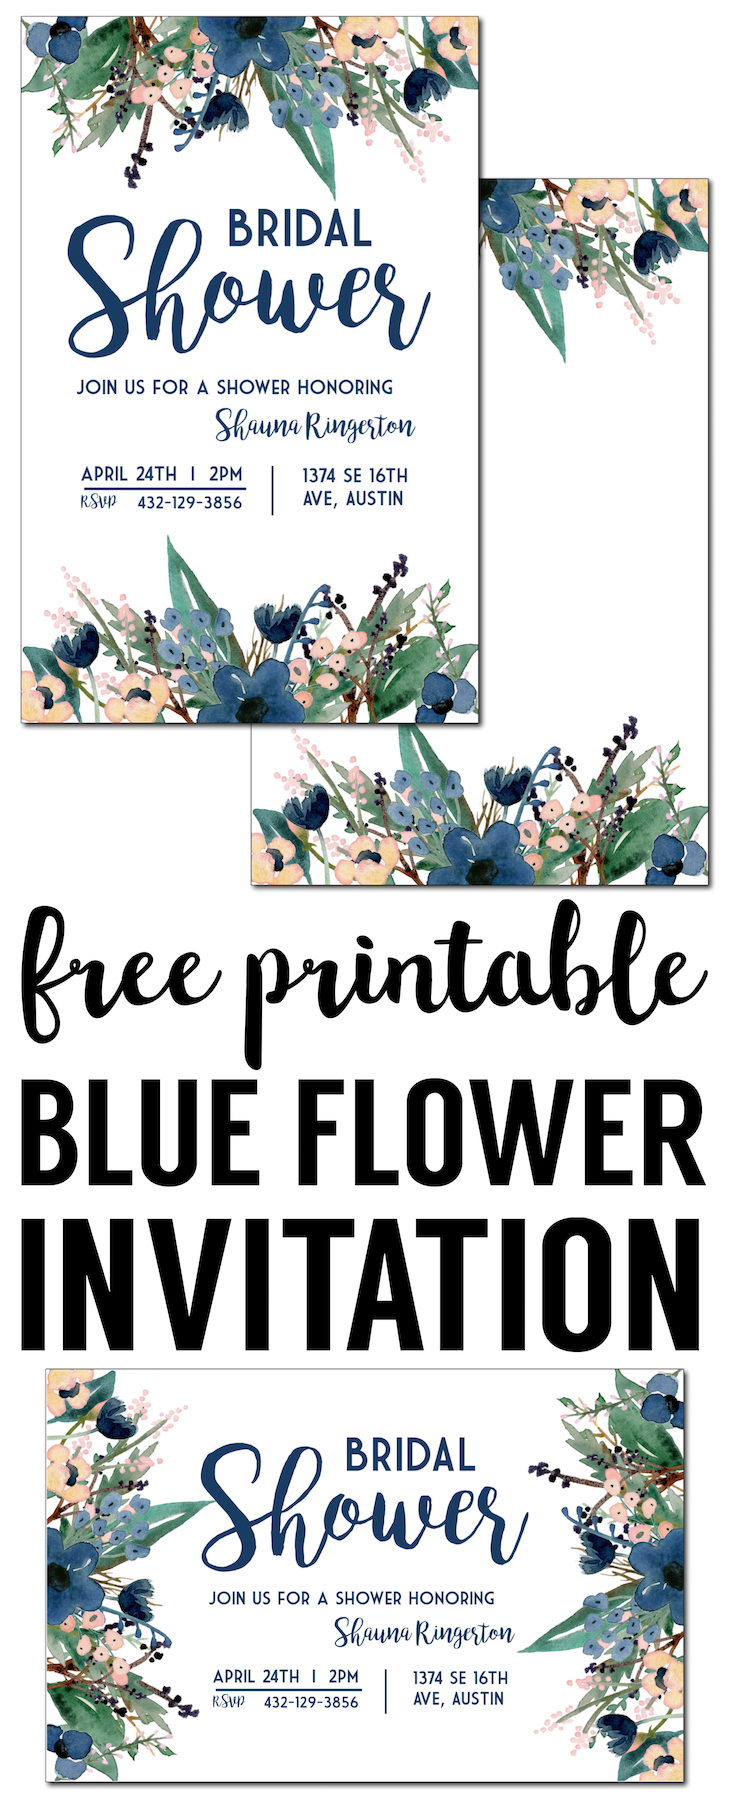 Blue Printable Invitation Templates. These free invitation templates are perfect for a wedding, bridal shower, baby shower, birthday party, or graduation party invitation., 